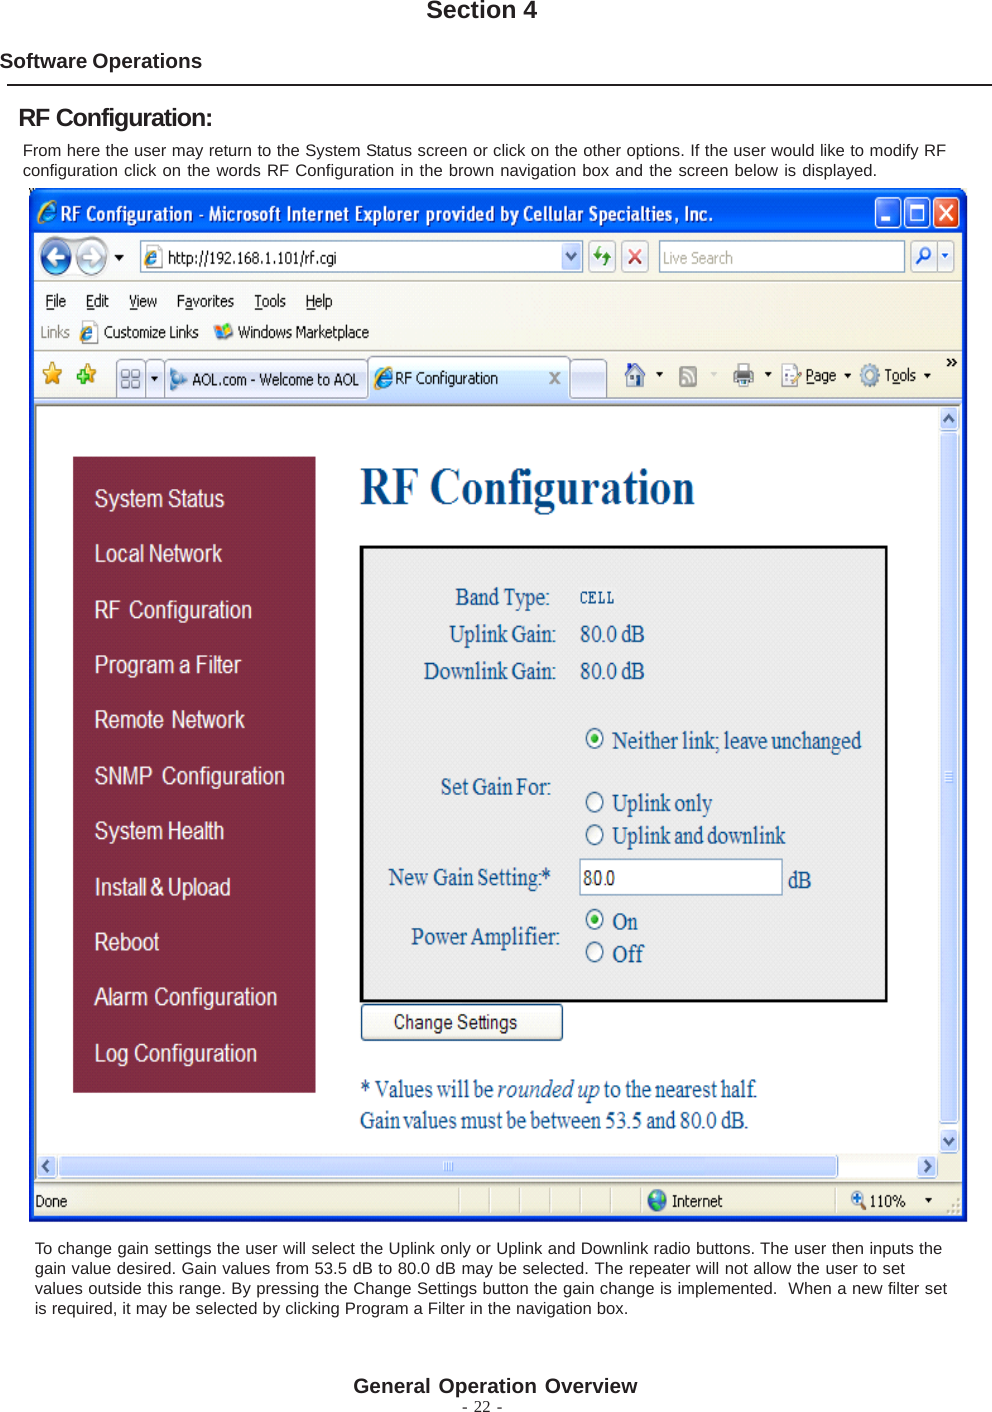 - 22 -Software OperationsSection 4From here the user may return to the System Status screen or click on the other options. If the user would like to modify RFconfiguration click on the words RF Configuration in the brown navigation box and the screen below is displayed.RF Configuration:To change gain settings the user will select the Uplink only or Uplink and Downlink radio buttons. The user then inputs thegain value desired. Gain values from 53.5 dB to 80.0 dB may be selected. The repeater will not allow the user to setvalues outside this range. By pressing the Change Settings button the gain change is implemented.  When a new filter setis required, it may be selected by clicking Program a Filter in the navigation box.General Operation Overview